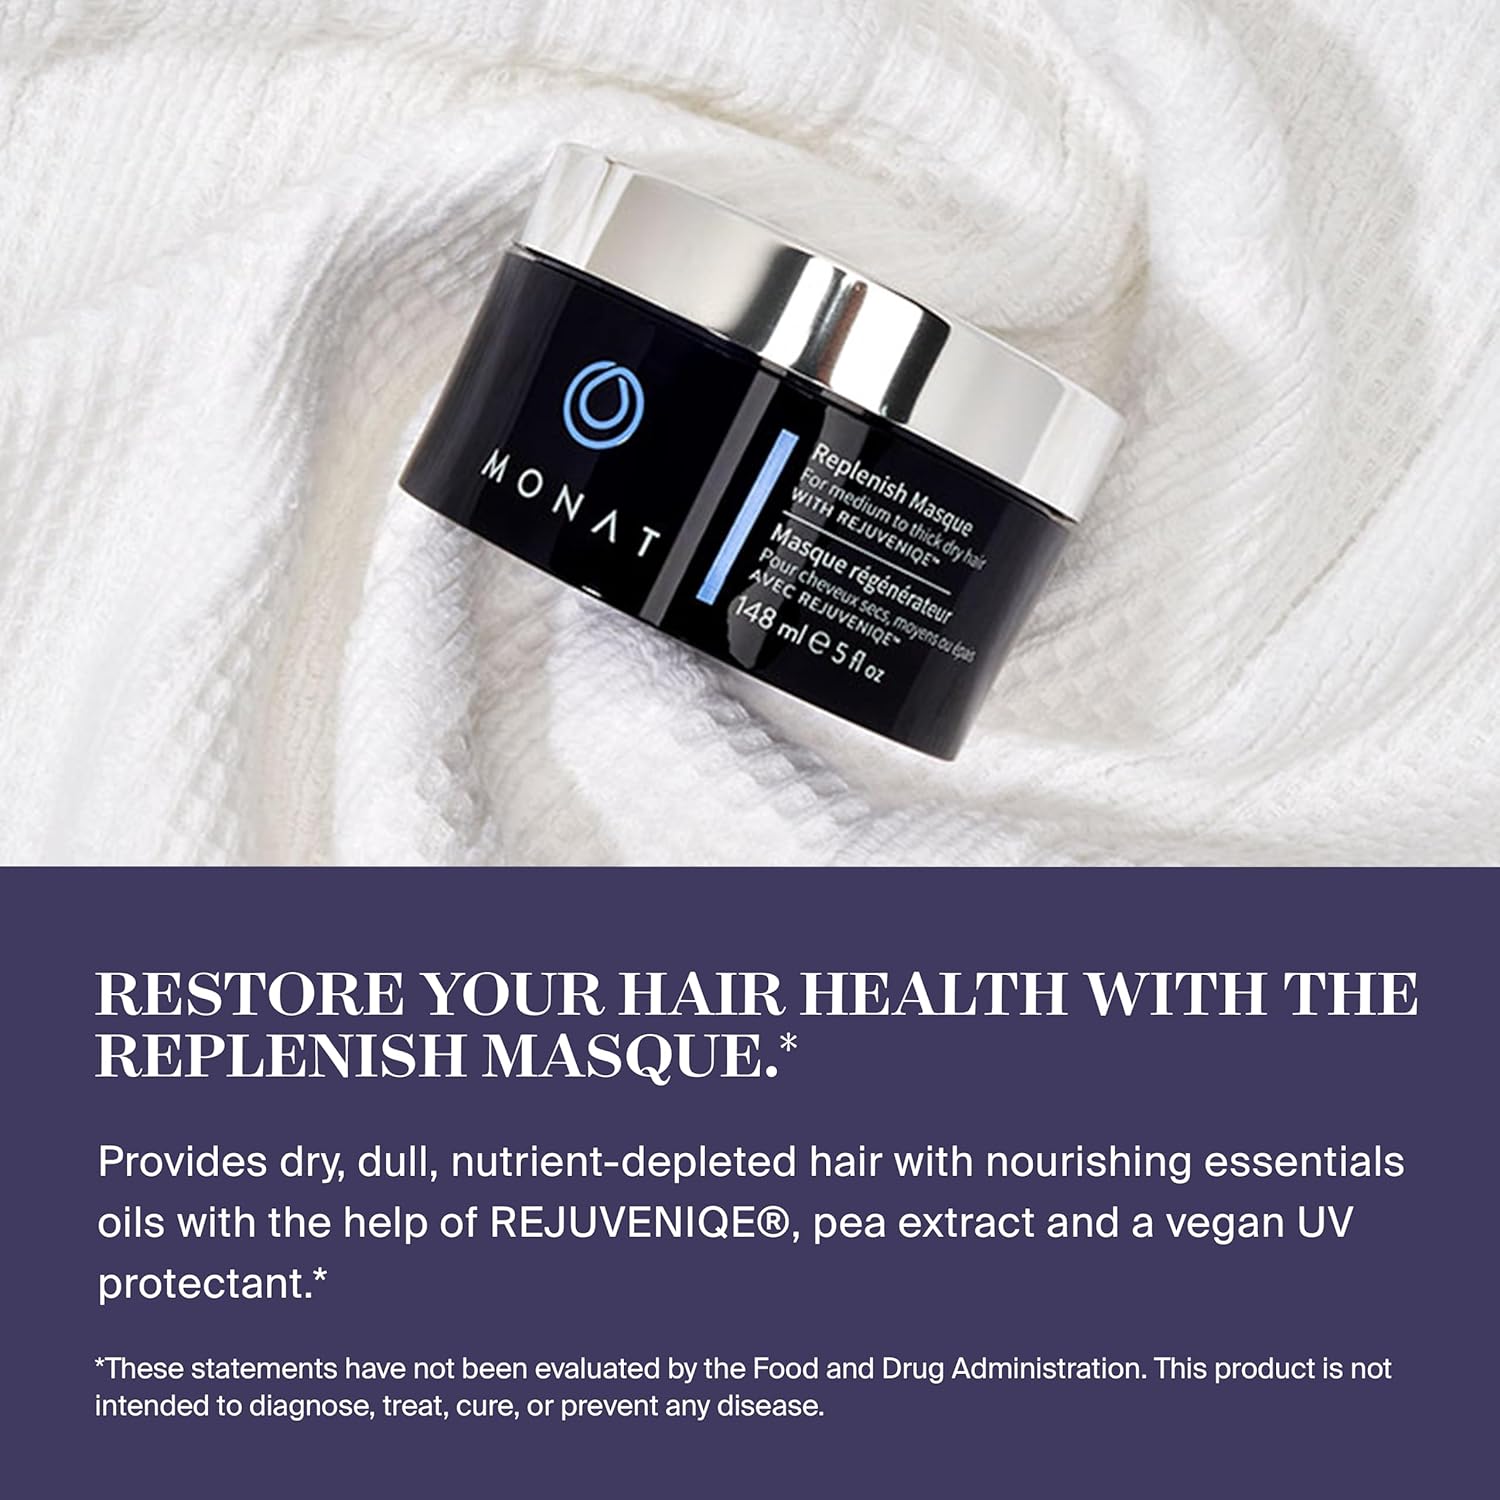 MONAT Replenish™ Masque Infused with Rejuveniqe® - Hair Masque that Deeply Condition Medium to Thick Hair. Hydrating Hair Mask w/ Pea Extract & Vegan UV Protectant - Net Wt. 148 ml ? 5.0 fl. oz. : Beauty & Personal Care